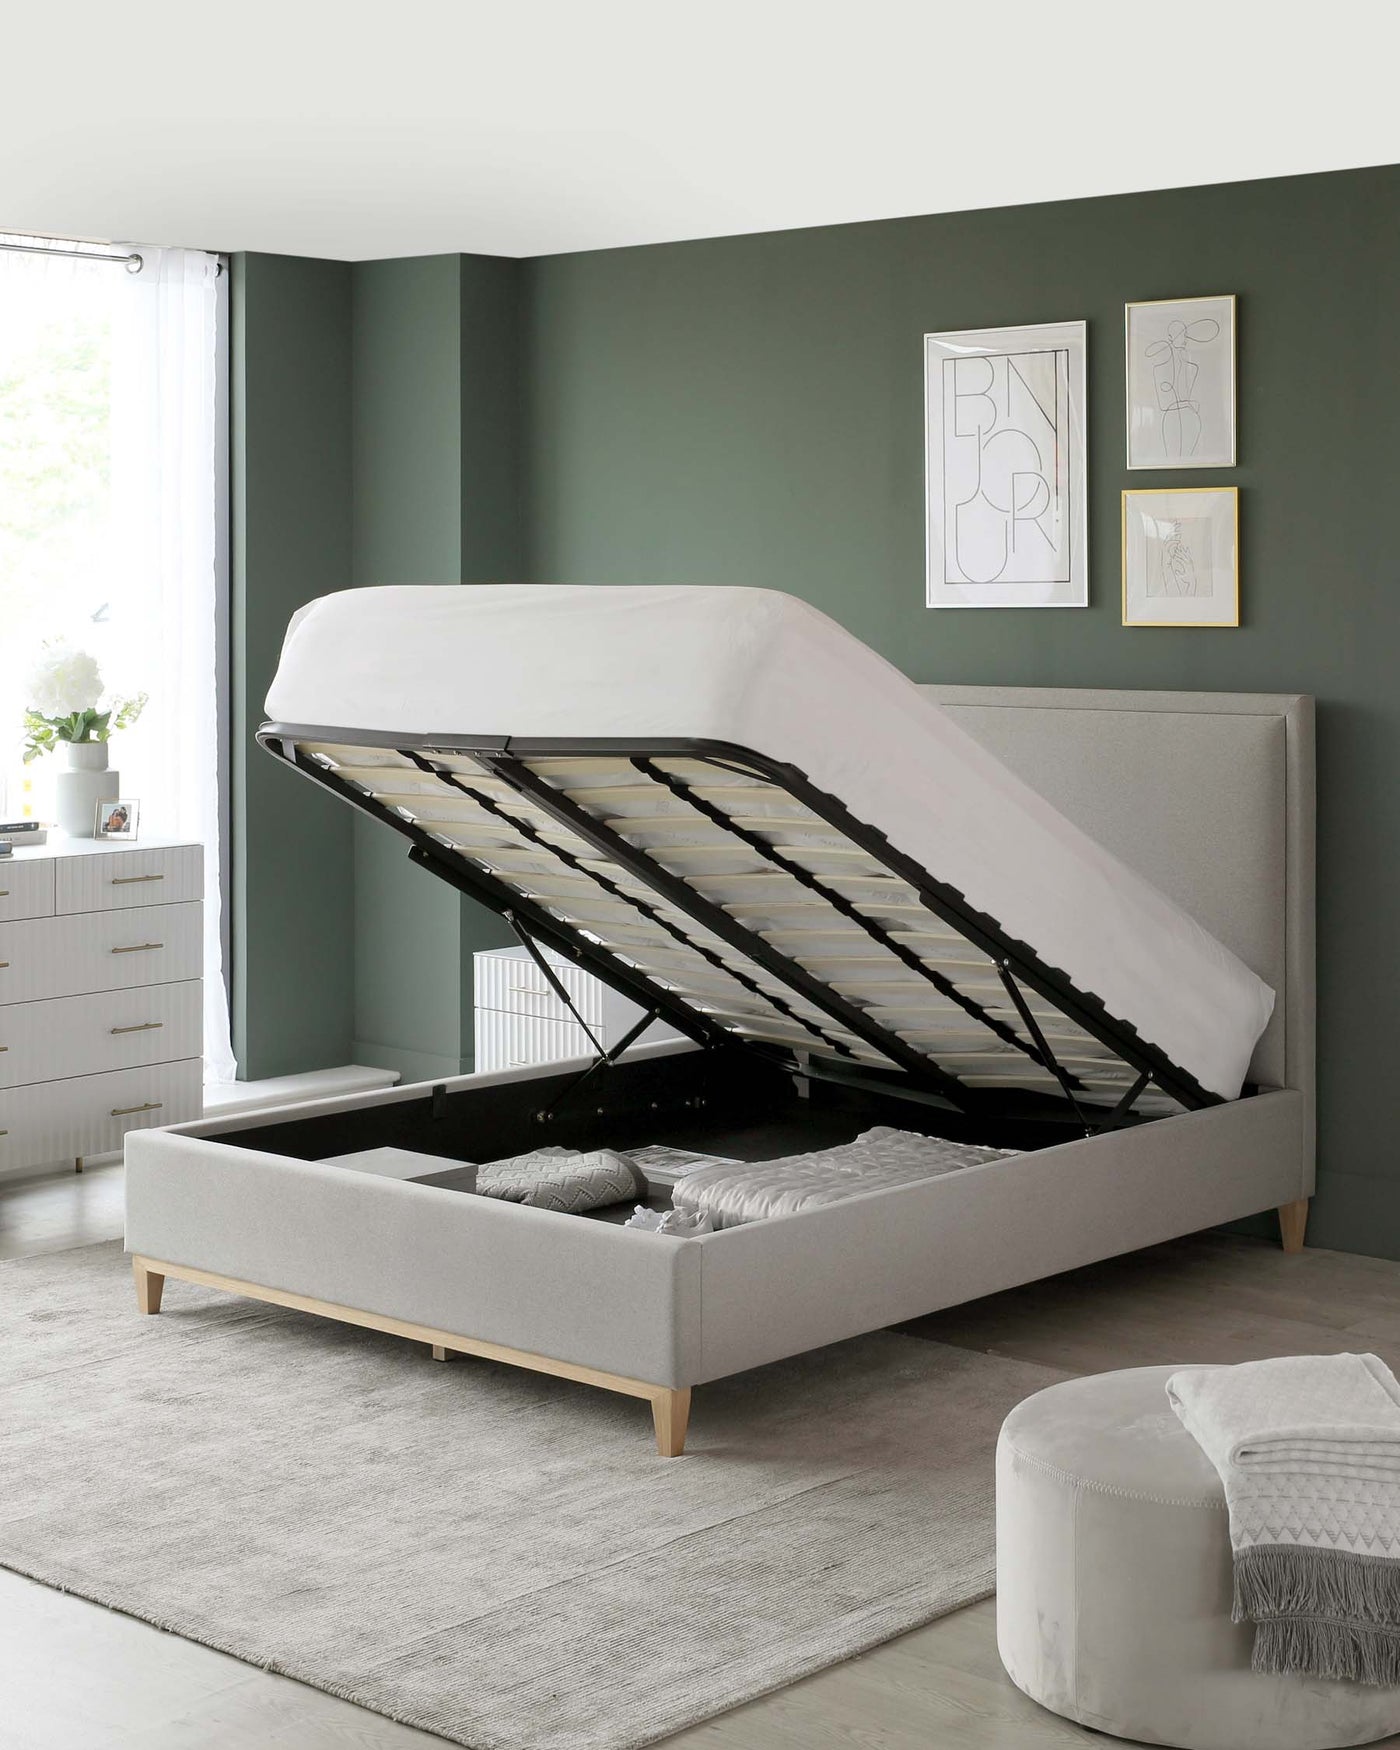 Modern grey upholstered storage bed with lifted mattress base revealing under-bed storage, accompanied by a white nightstand and grey ottoman on a textured area rug.